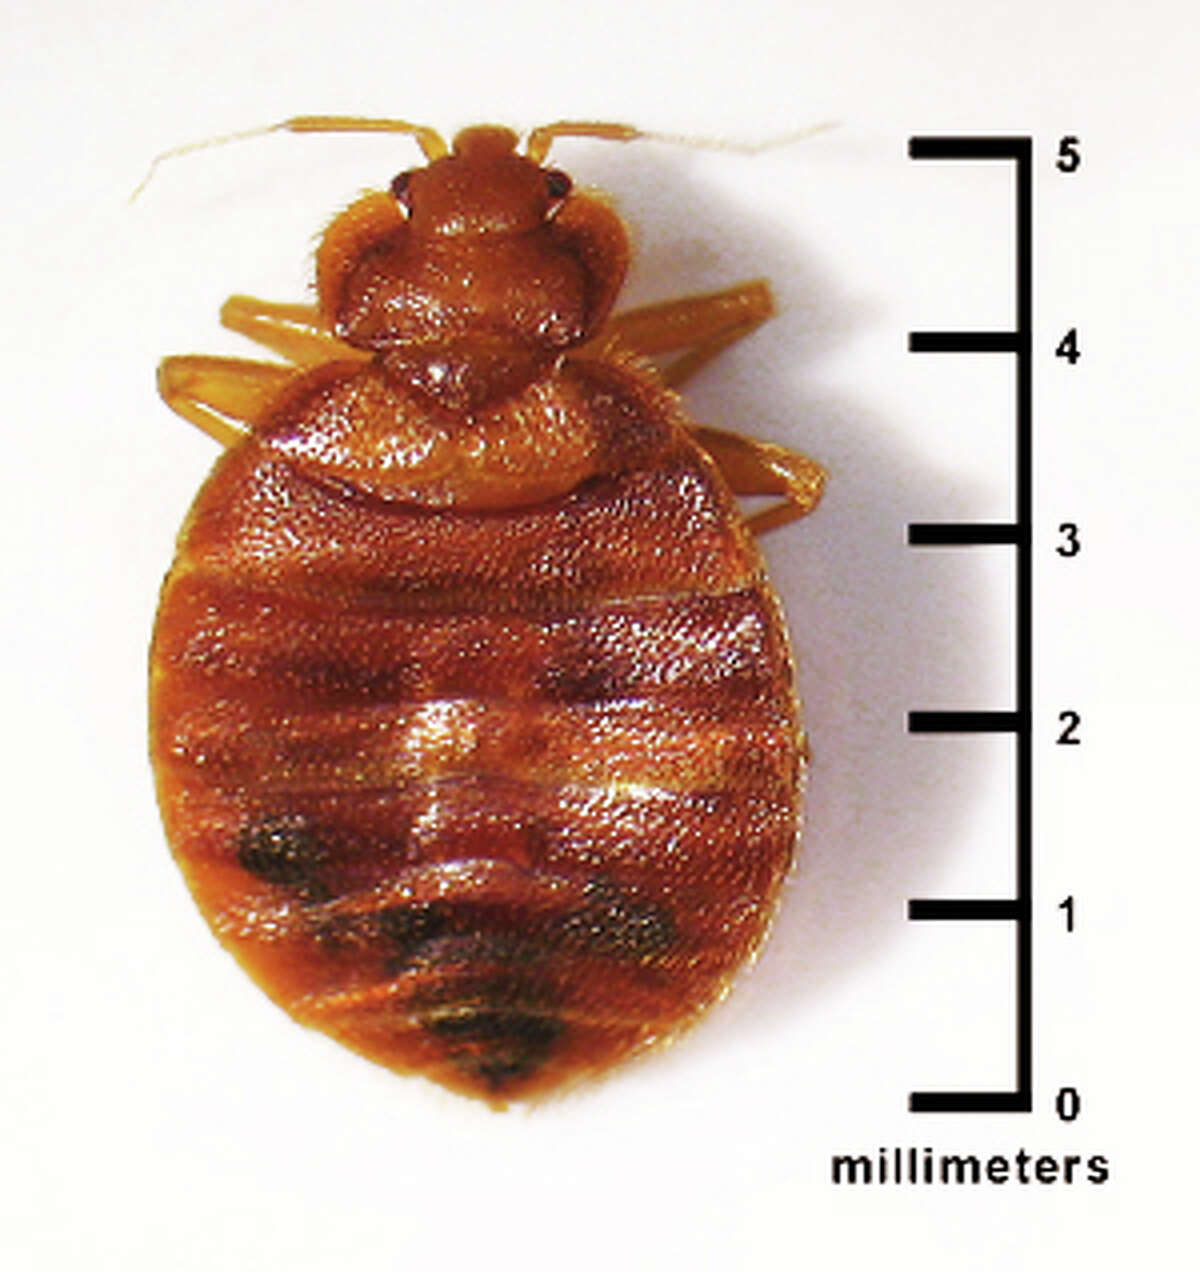 A photo of a bedbug, from the federal Environmental Protection Agency website. Evidnce of bedbugs was found recently on a chair at the Fairfield Public Library, but officials stress there is no infestation of the facility.